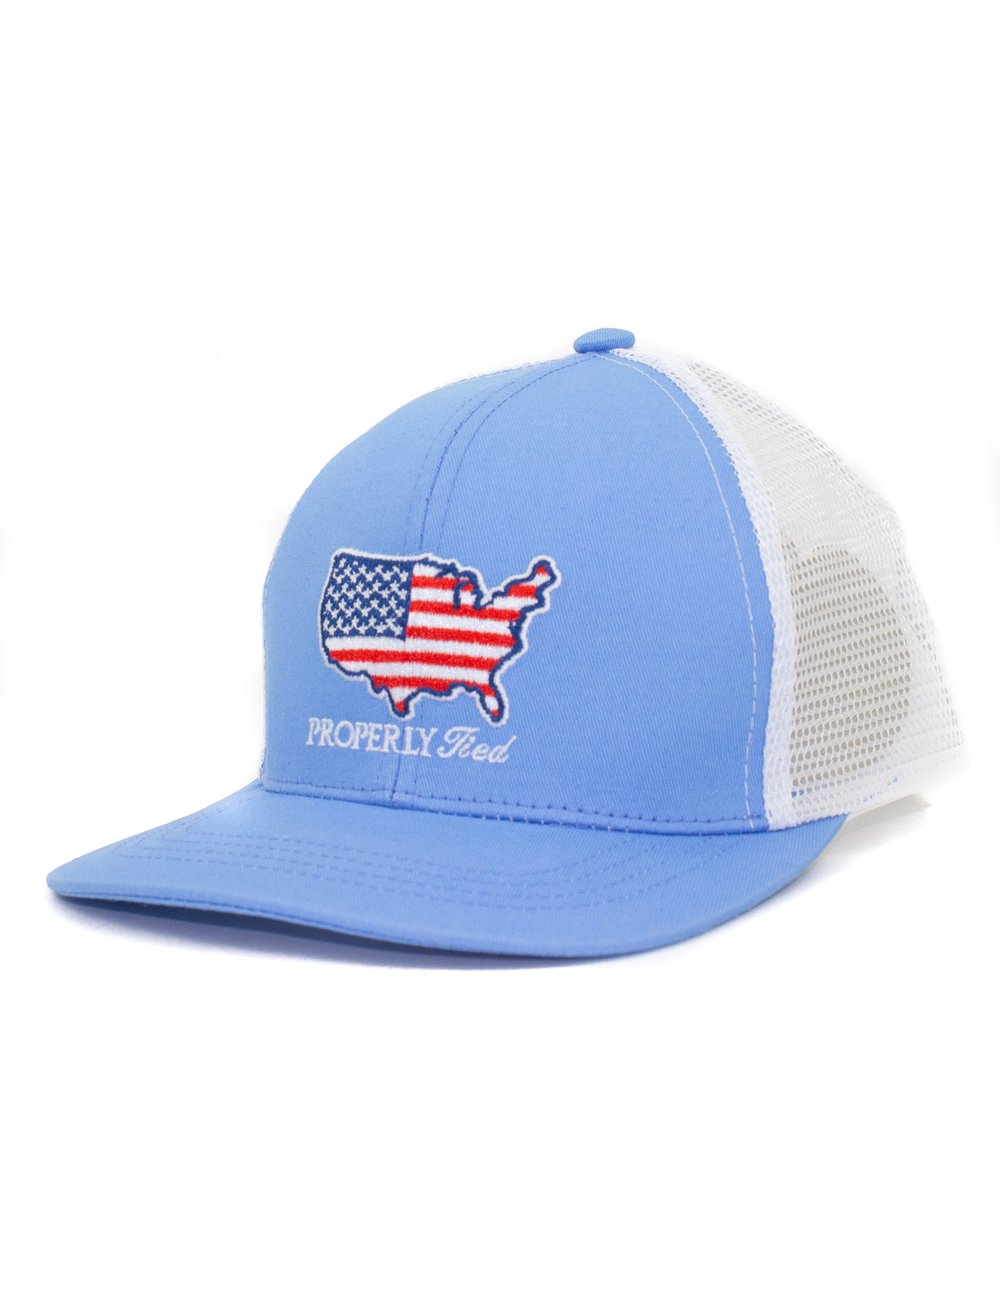 Properly Tied: Youth Trucker Hat Old Glory